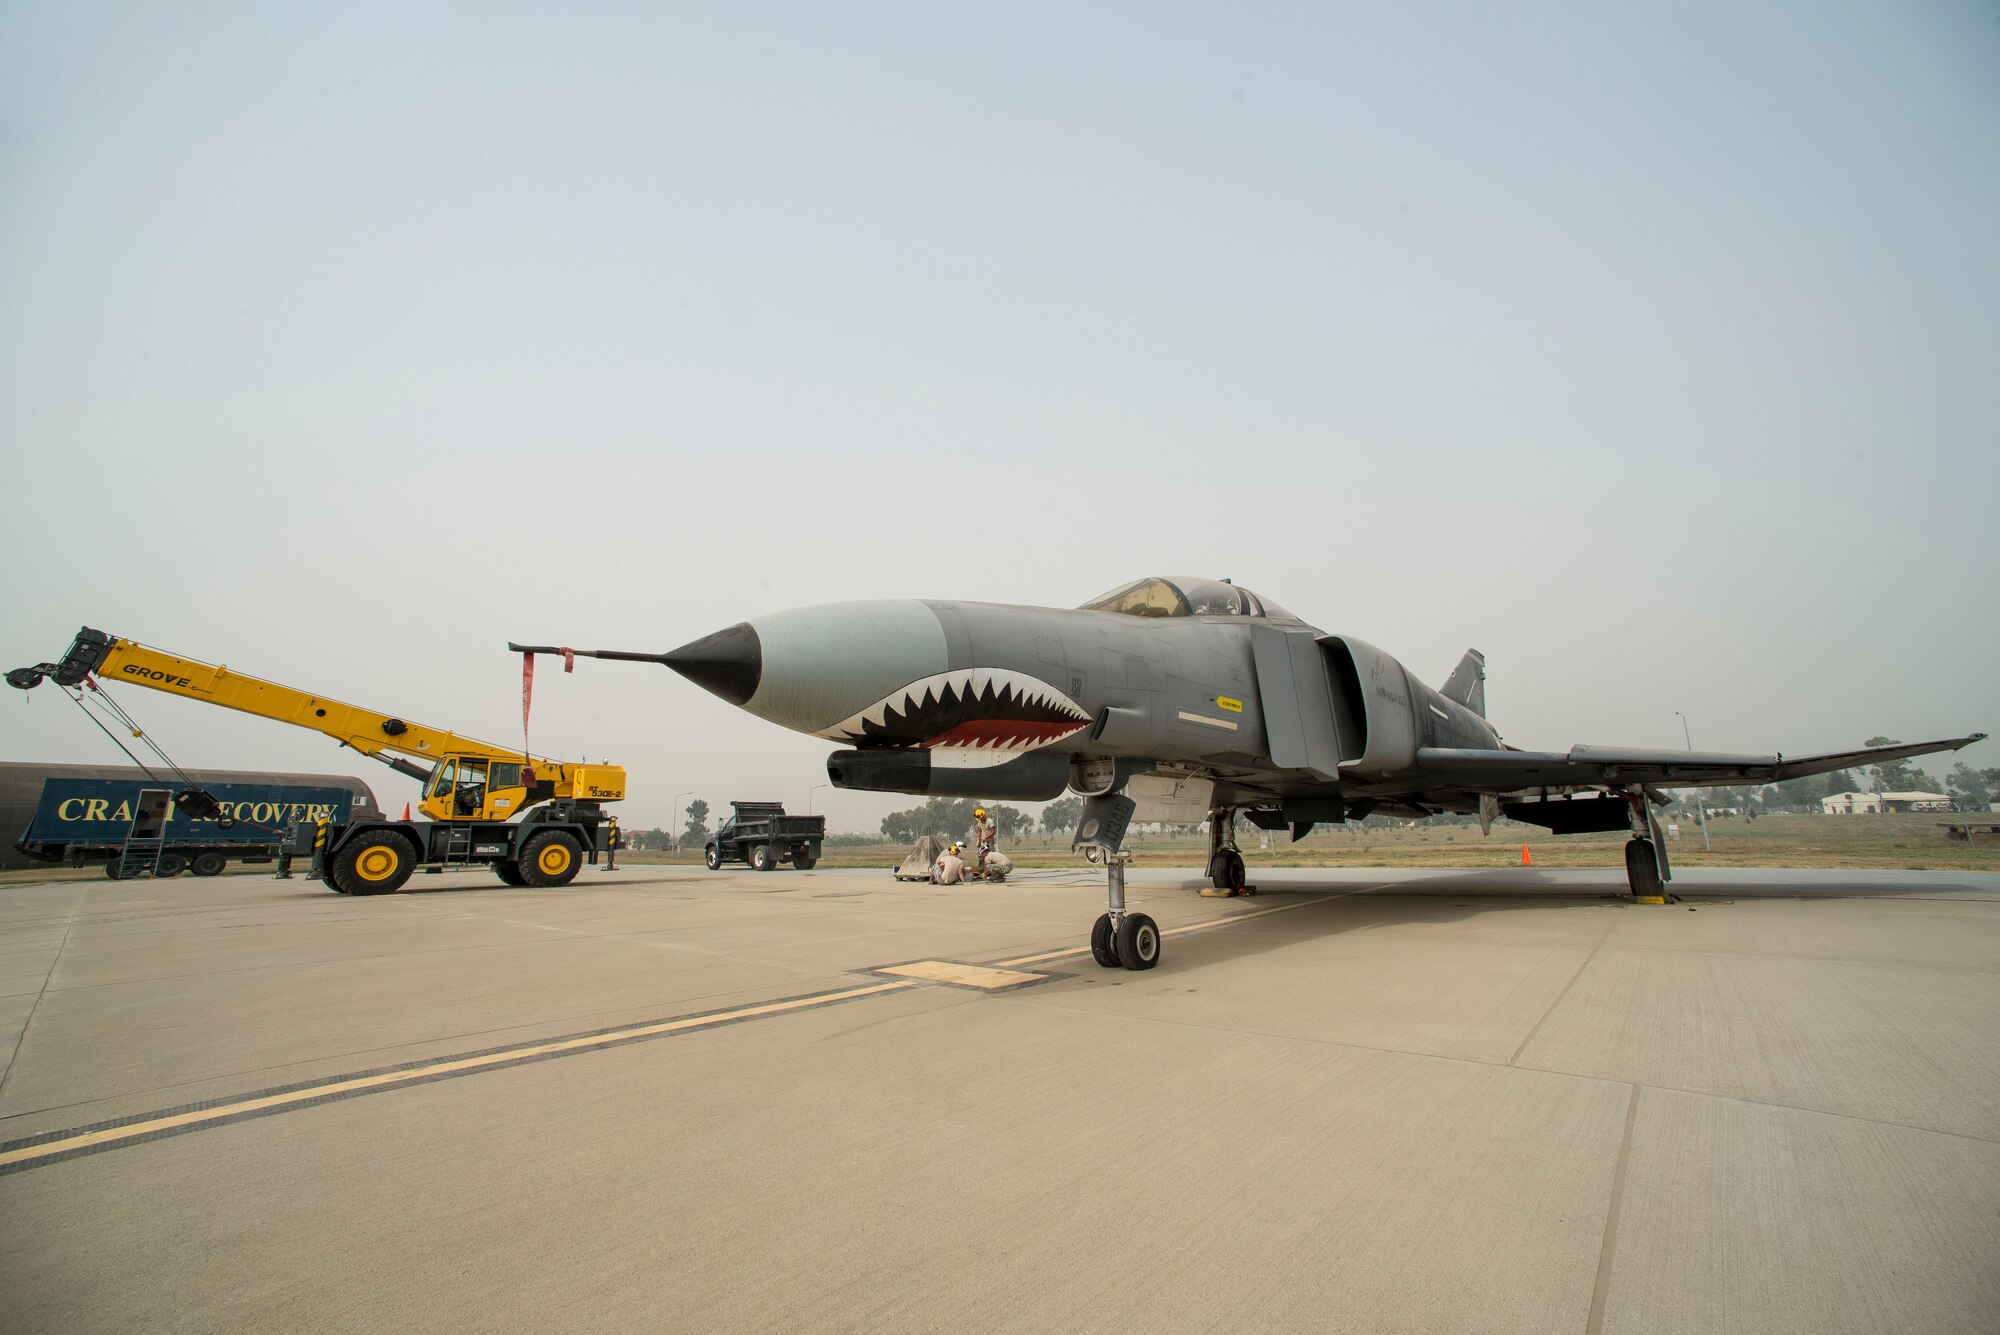 The 39th Maintenance Squadron’s Crash, Damaged, Disabled Aircraft Recovery team conducted a joint aircraft lift exercise Sept. 10, 2015, at Incirlik Air Base, Turkey. The exercise was designed to give members of the CDDAR team real-world experience by performing an actual aircraft lift while using related equipment. (U.S. Air Force photo by Airman 1st Class Cory W. Bush/Released)